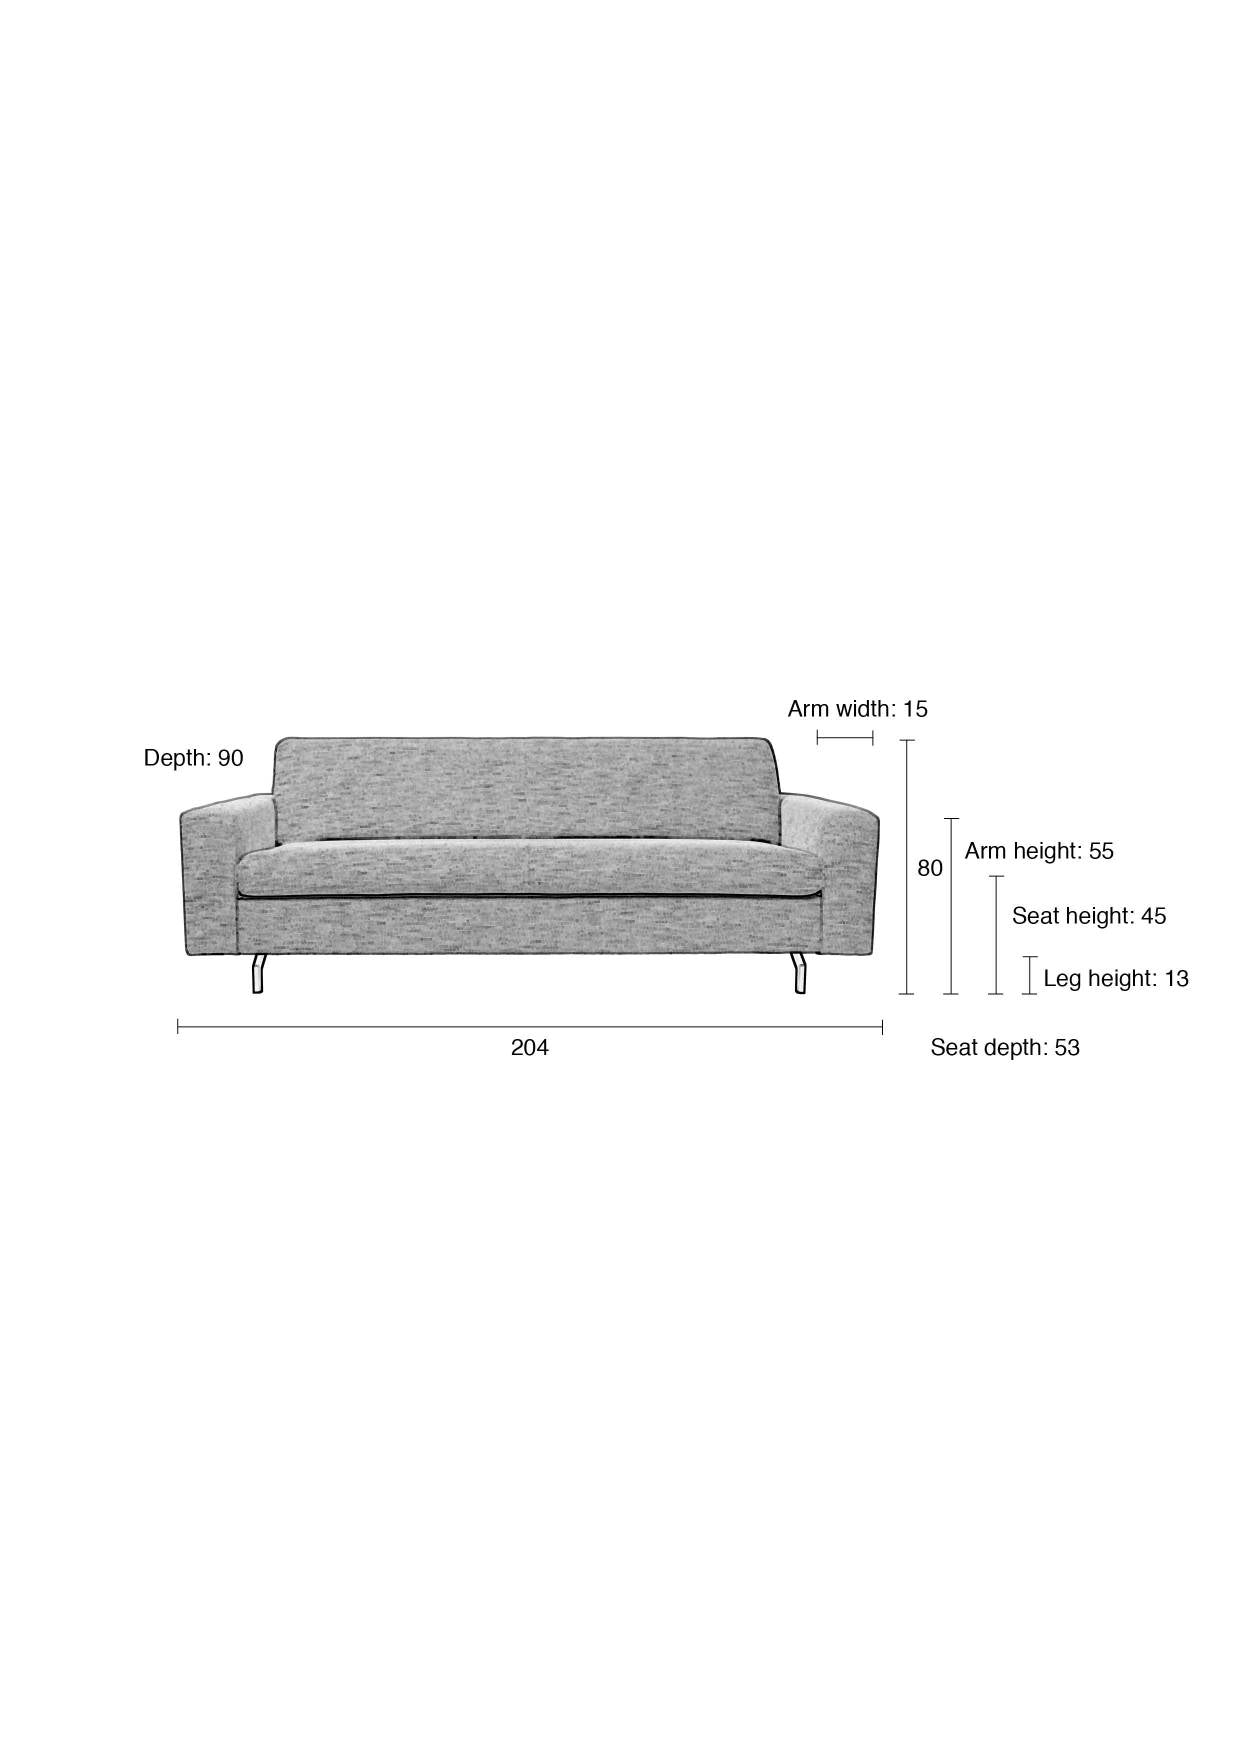 Zuiver | SOFA JEAN 2,5-SEATER ANTHRACITE Default Title